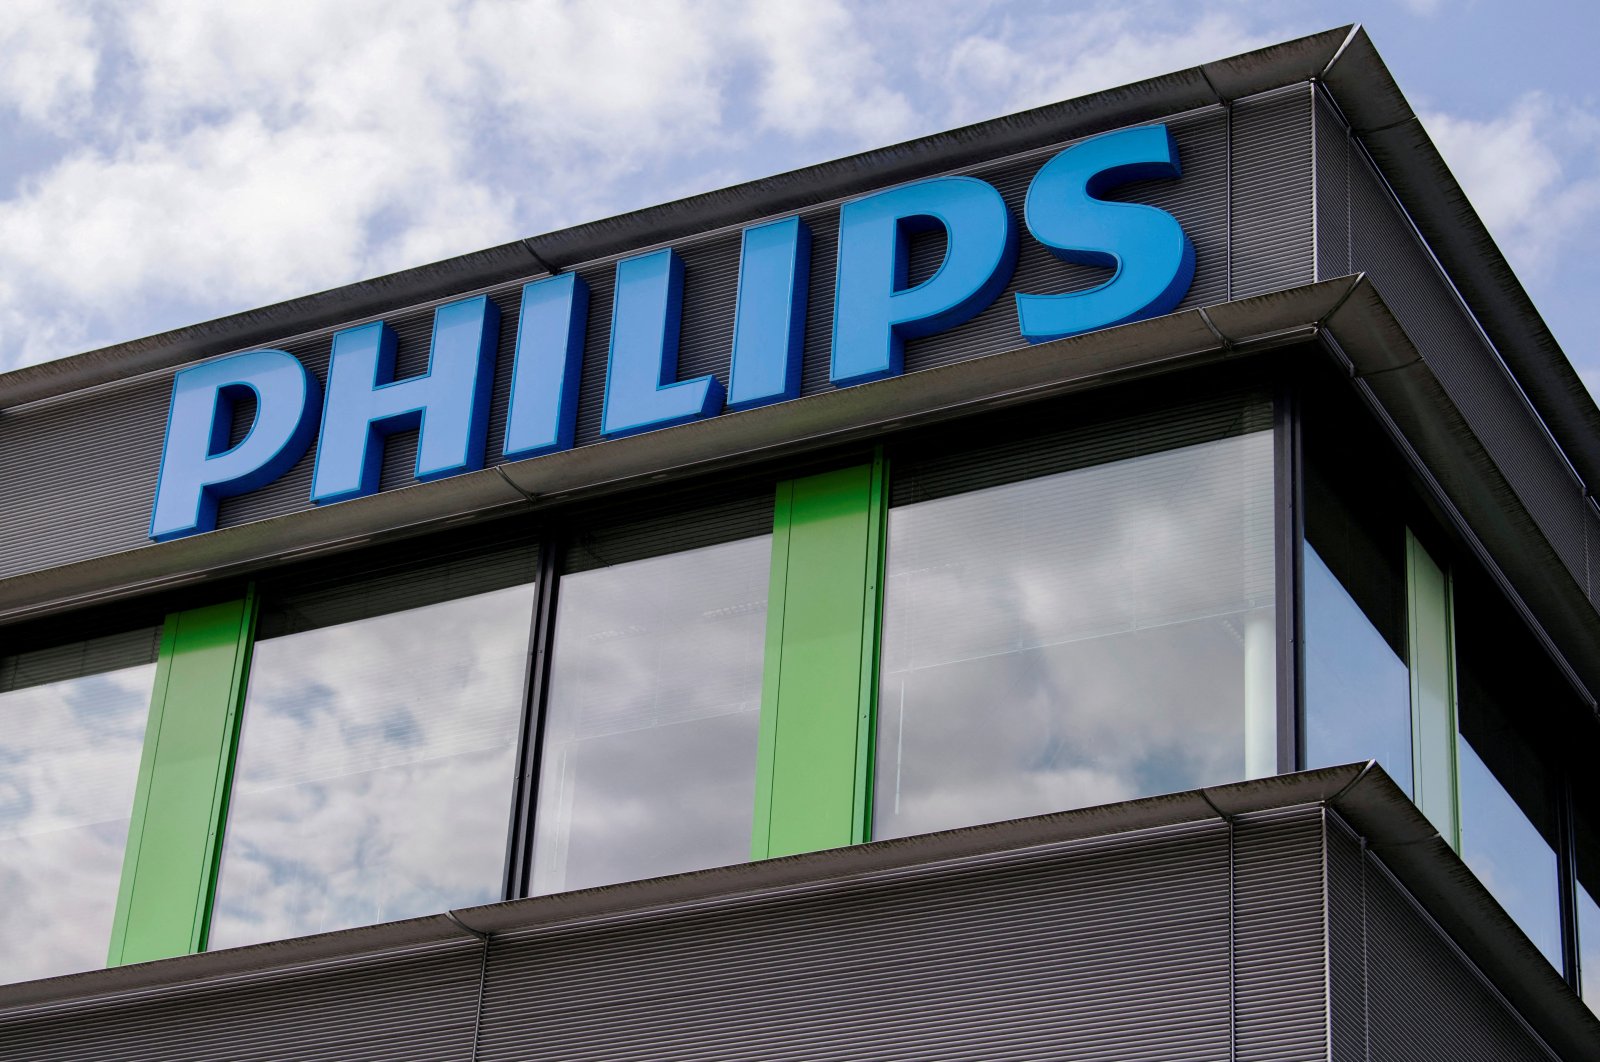 Philips Healthcare headquarters in Best, Netherlands, Aug. 30, 2018. (Reuters Photo)